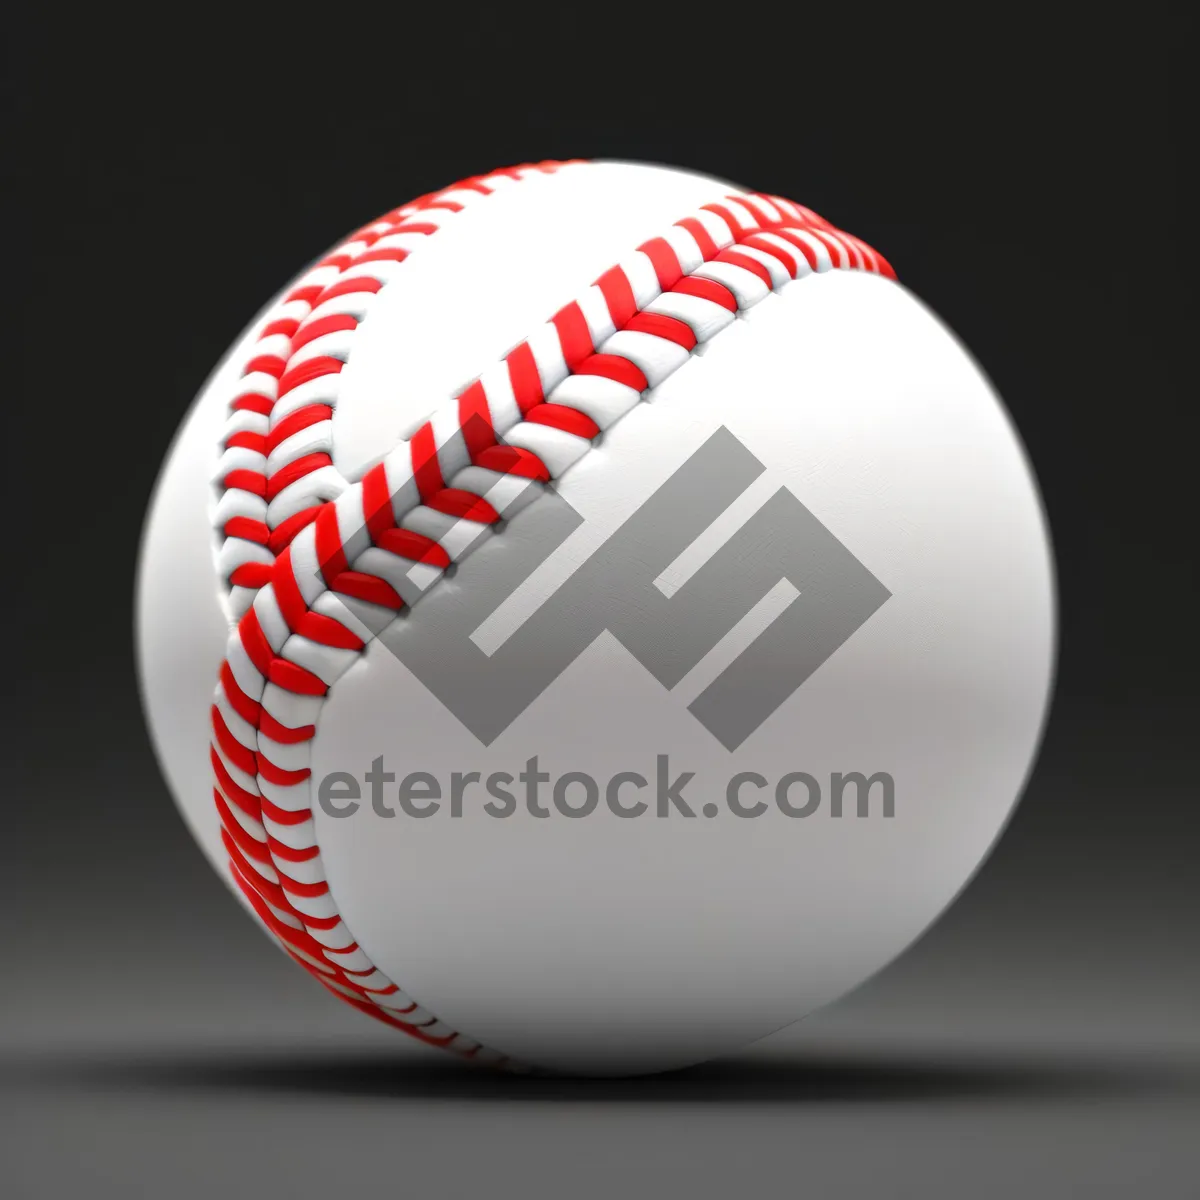 Picture of Baseball game equipment - Play ball, hit home runs!